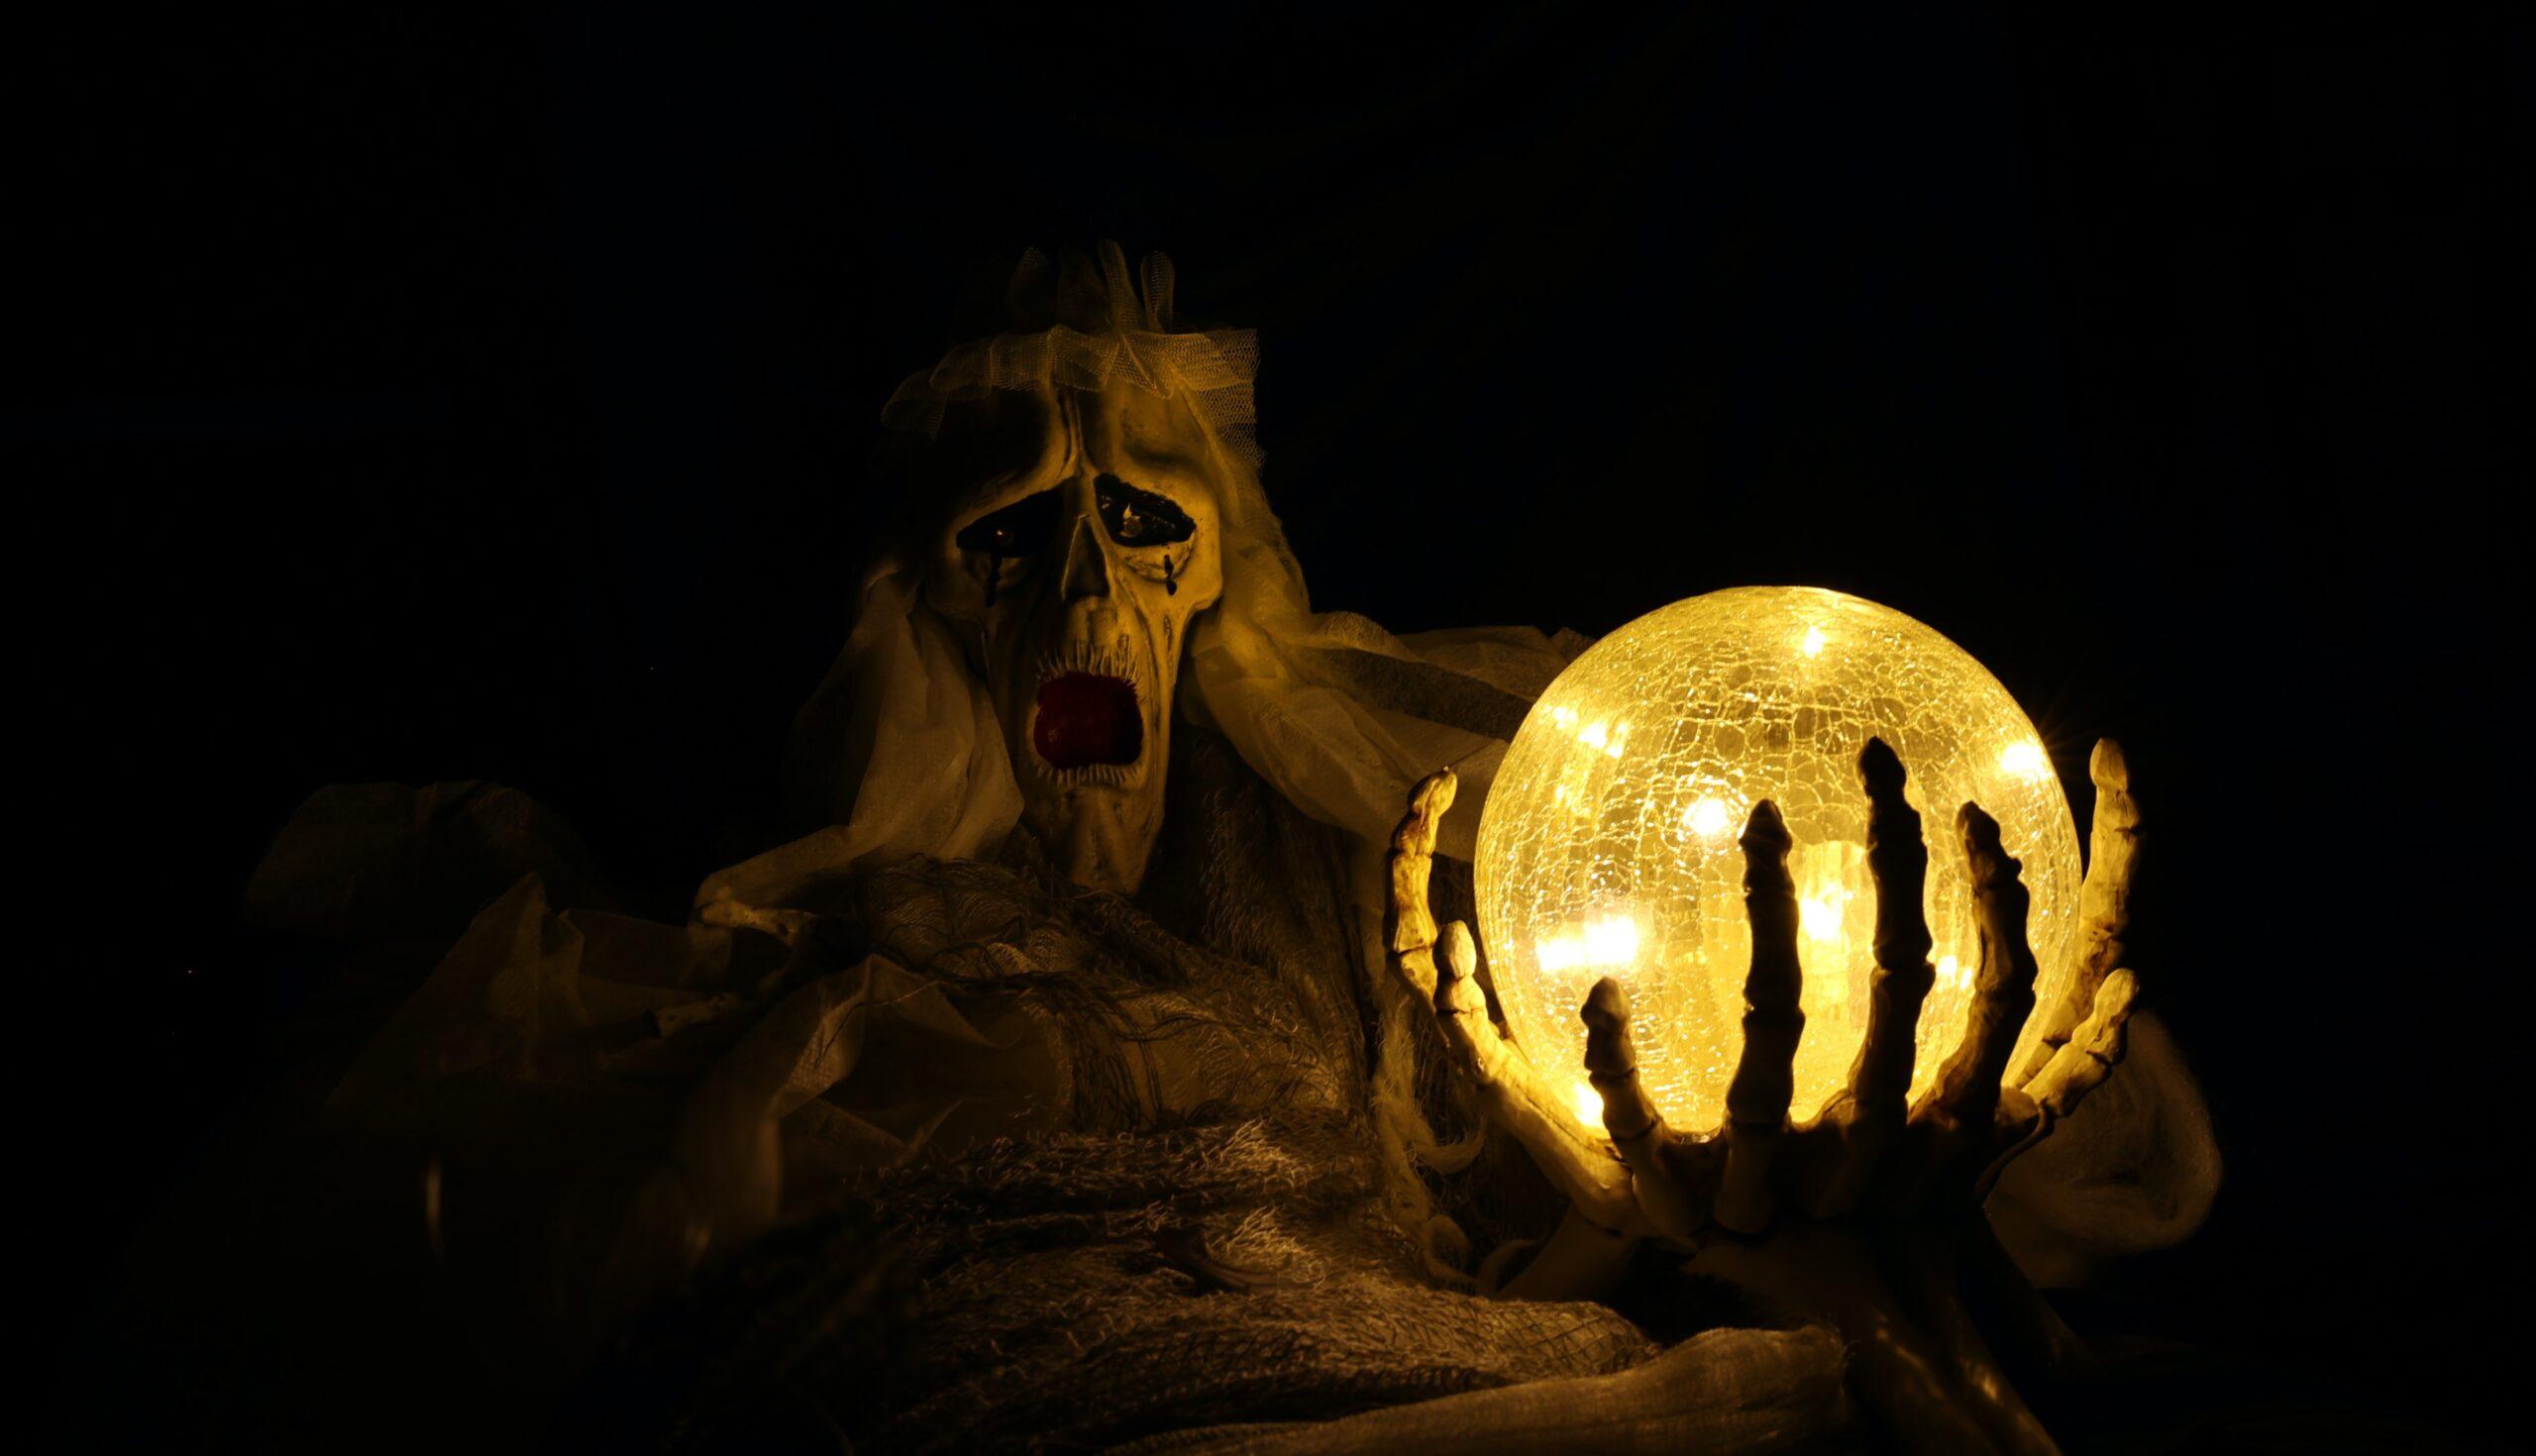 A lantern lit up in front of a ghoulish-looking creature as part of an article about Halloween tech.